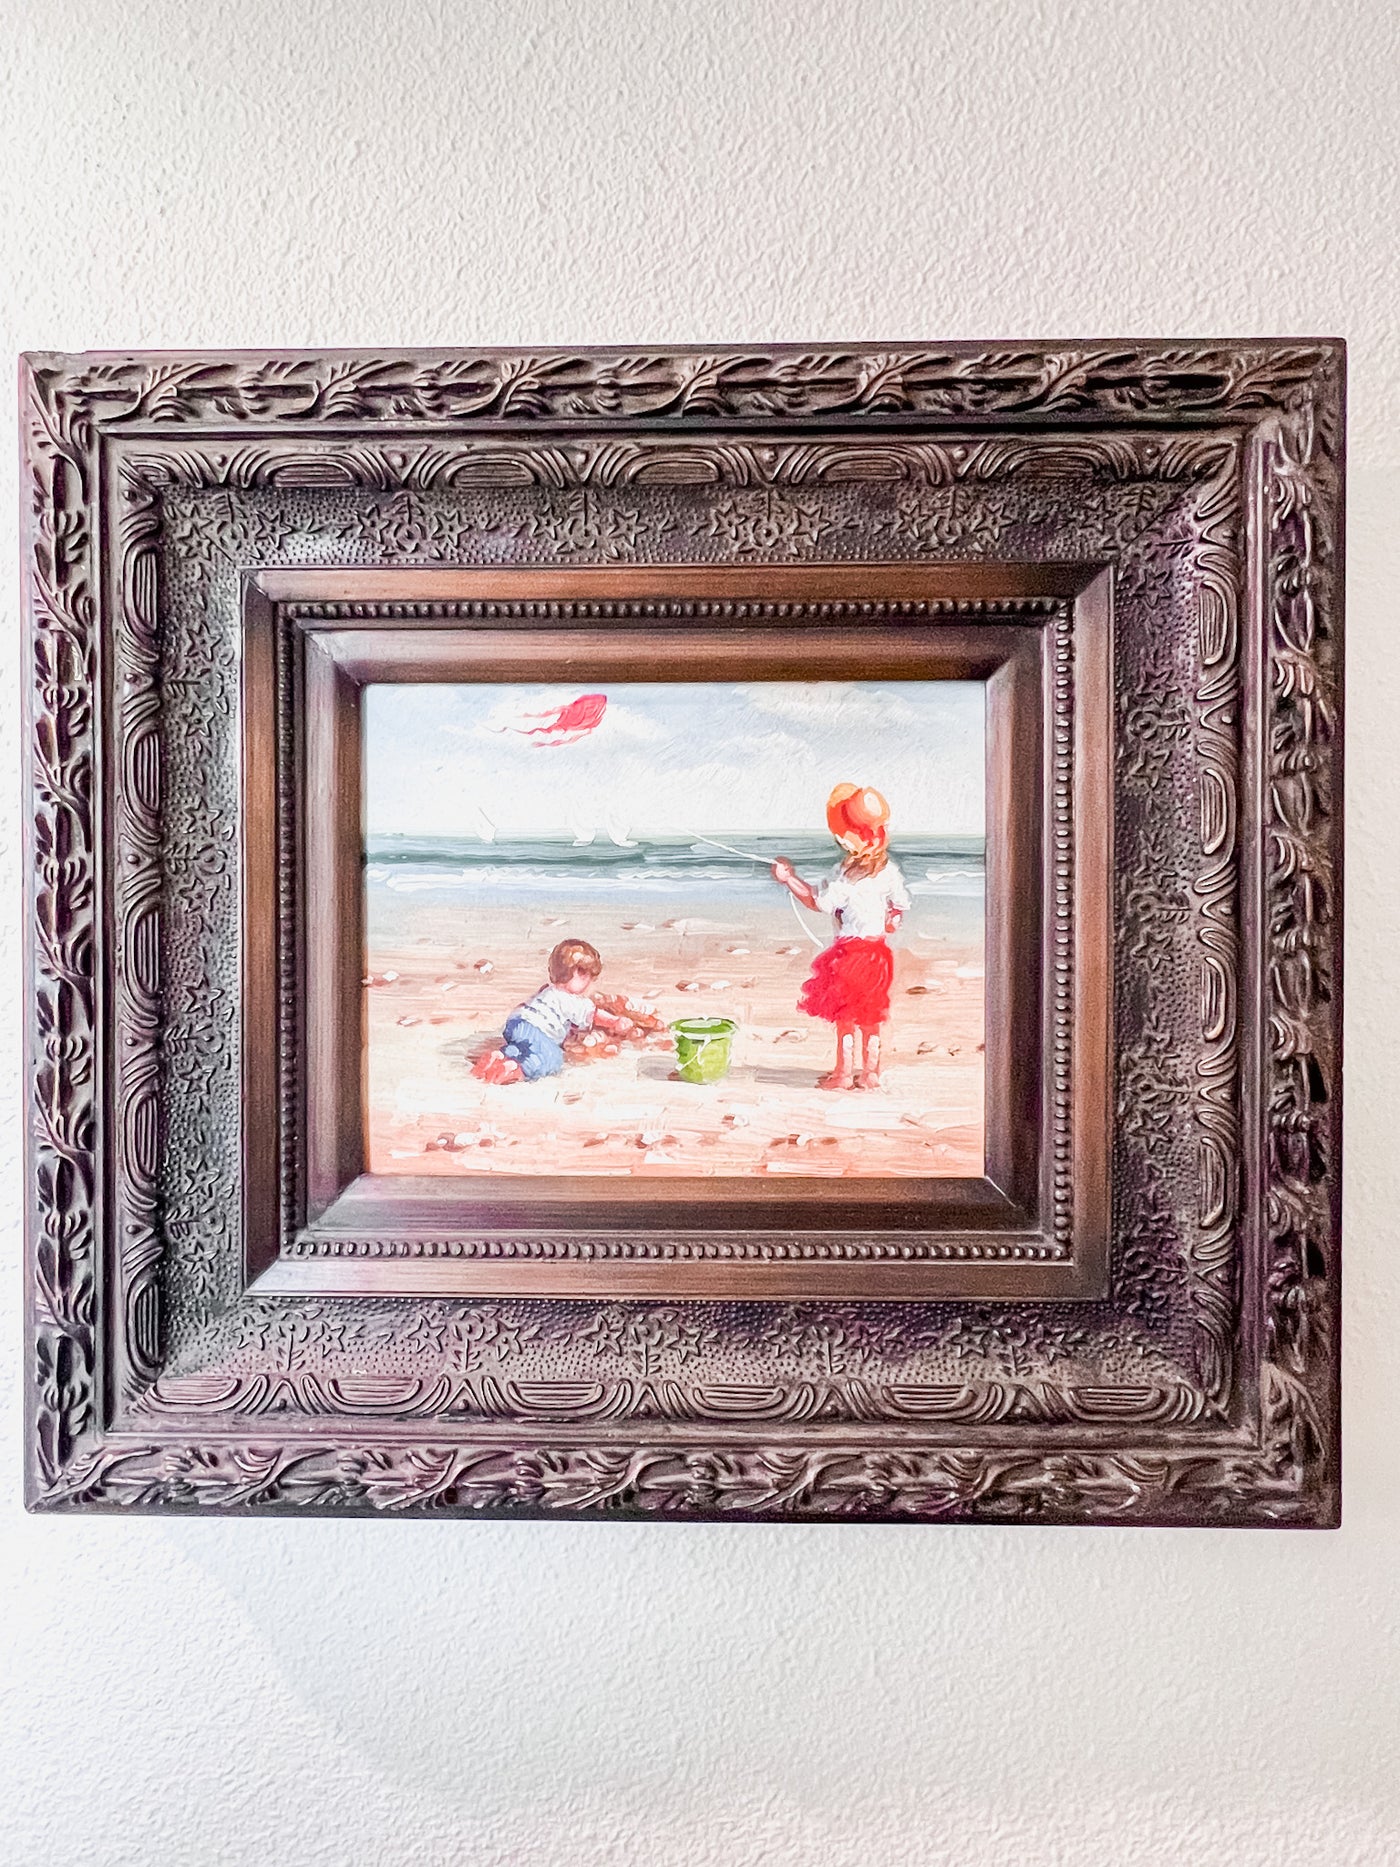 Petite Oil Painting of Children at the Beach